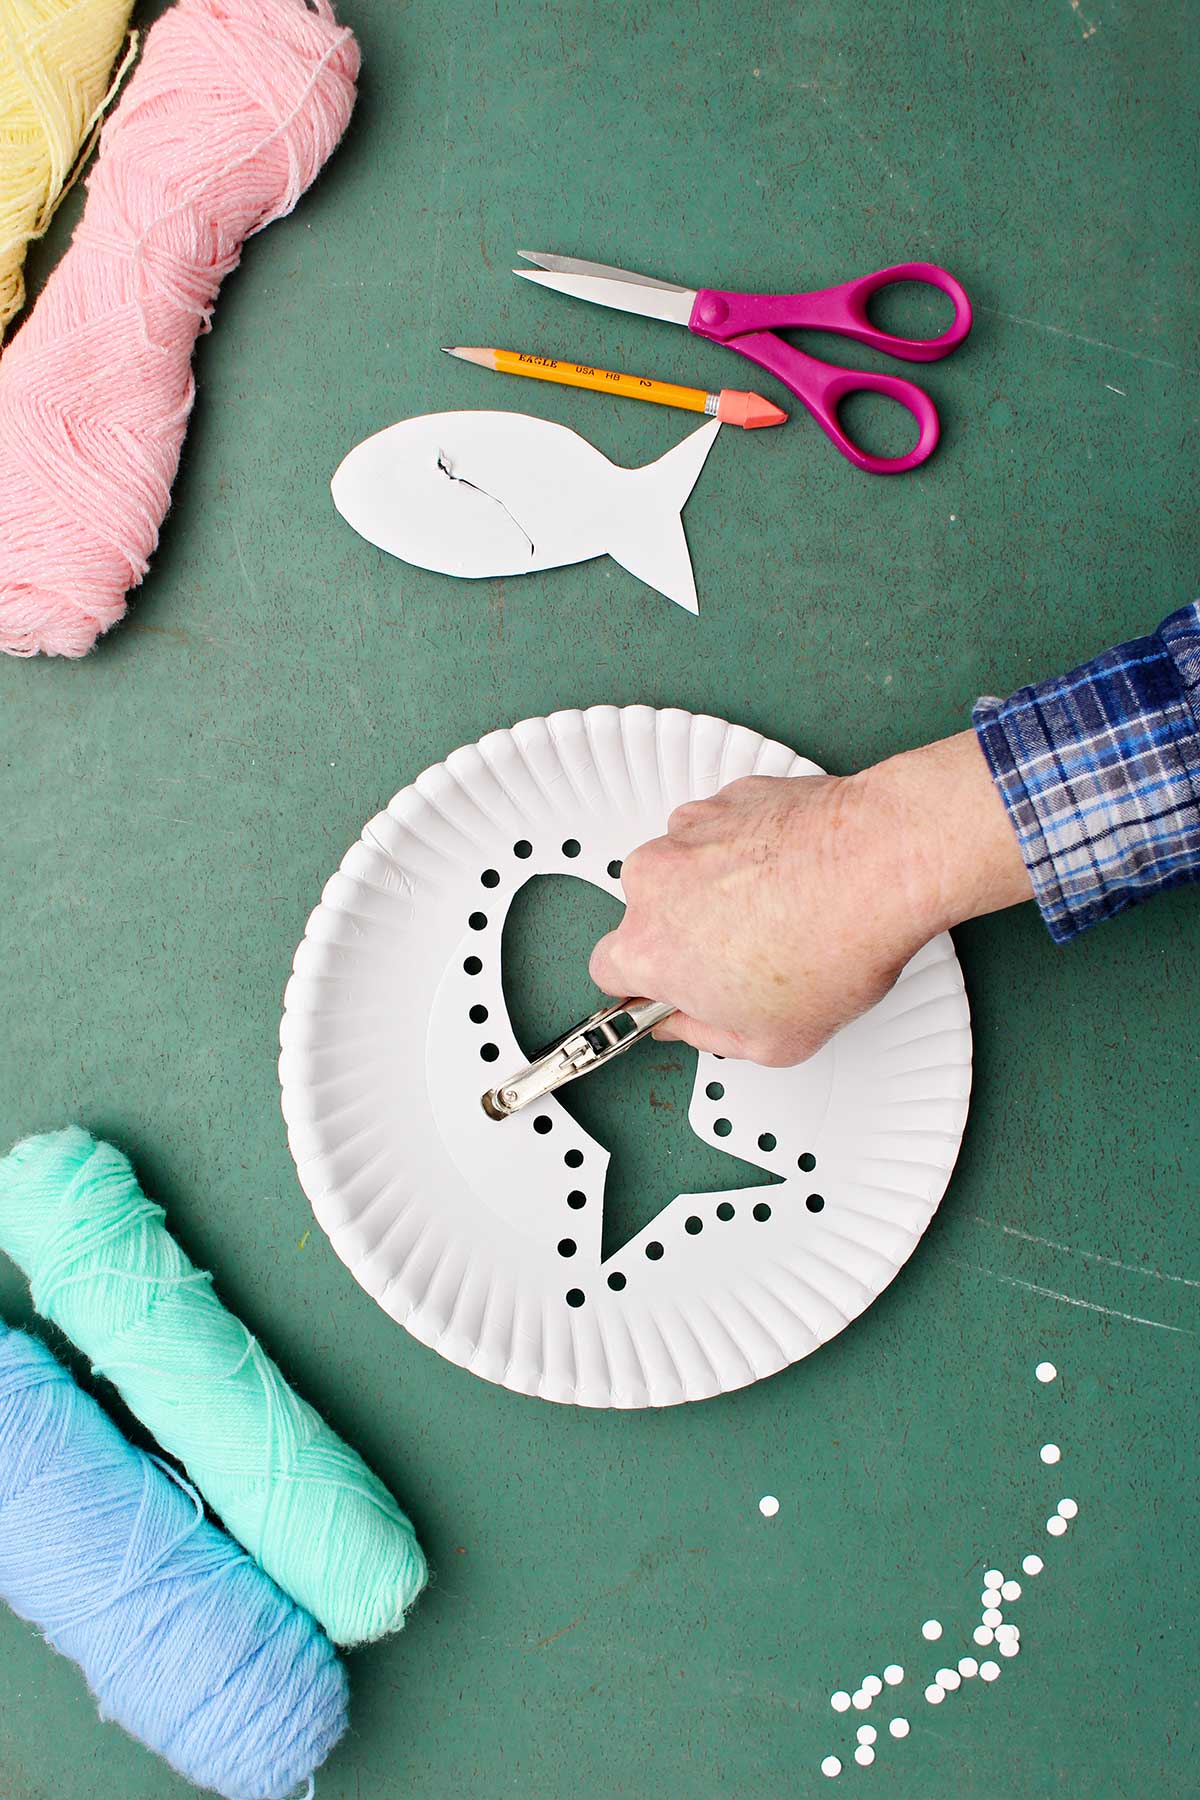 Hand punching holes around fish cut out from paper plate with other supplies near by.